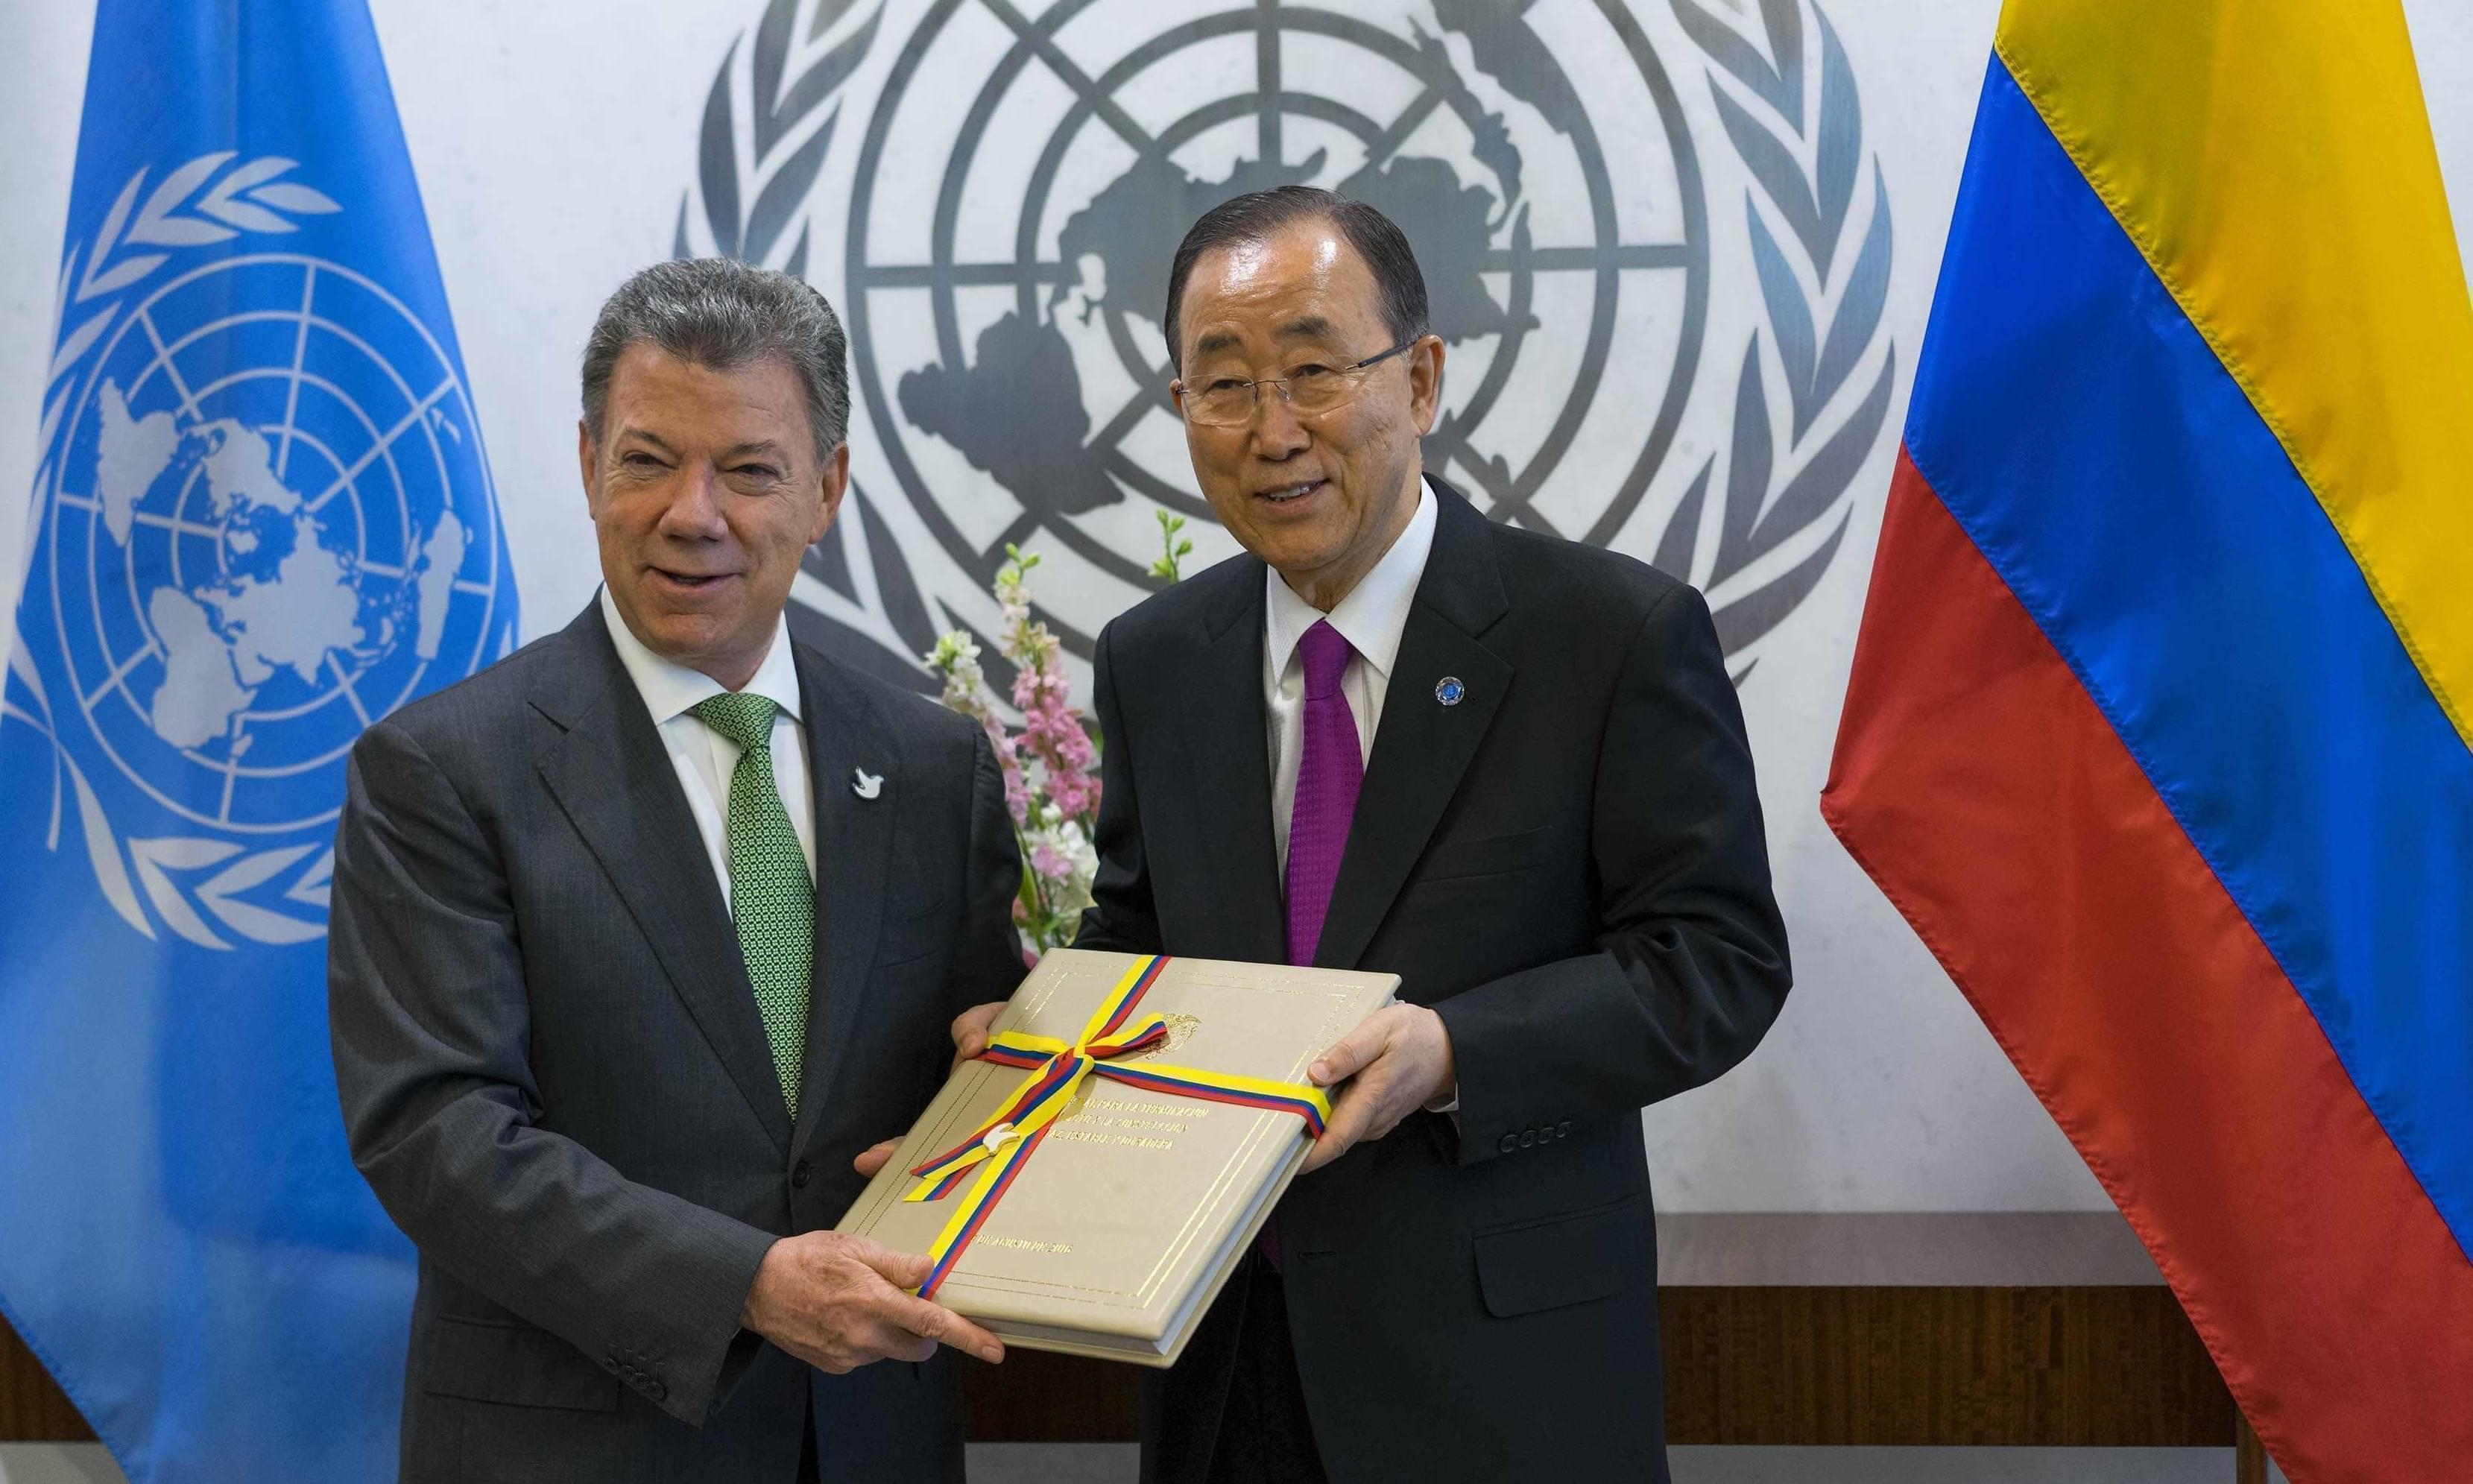 President Juan Manuel Santos of Colombia presents a copy of a peace agreement that was forged in his country to United Nations Secretary-General Ban Ki-moon.